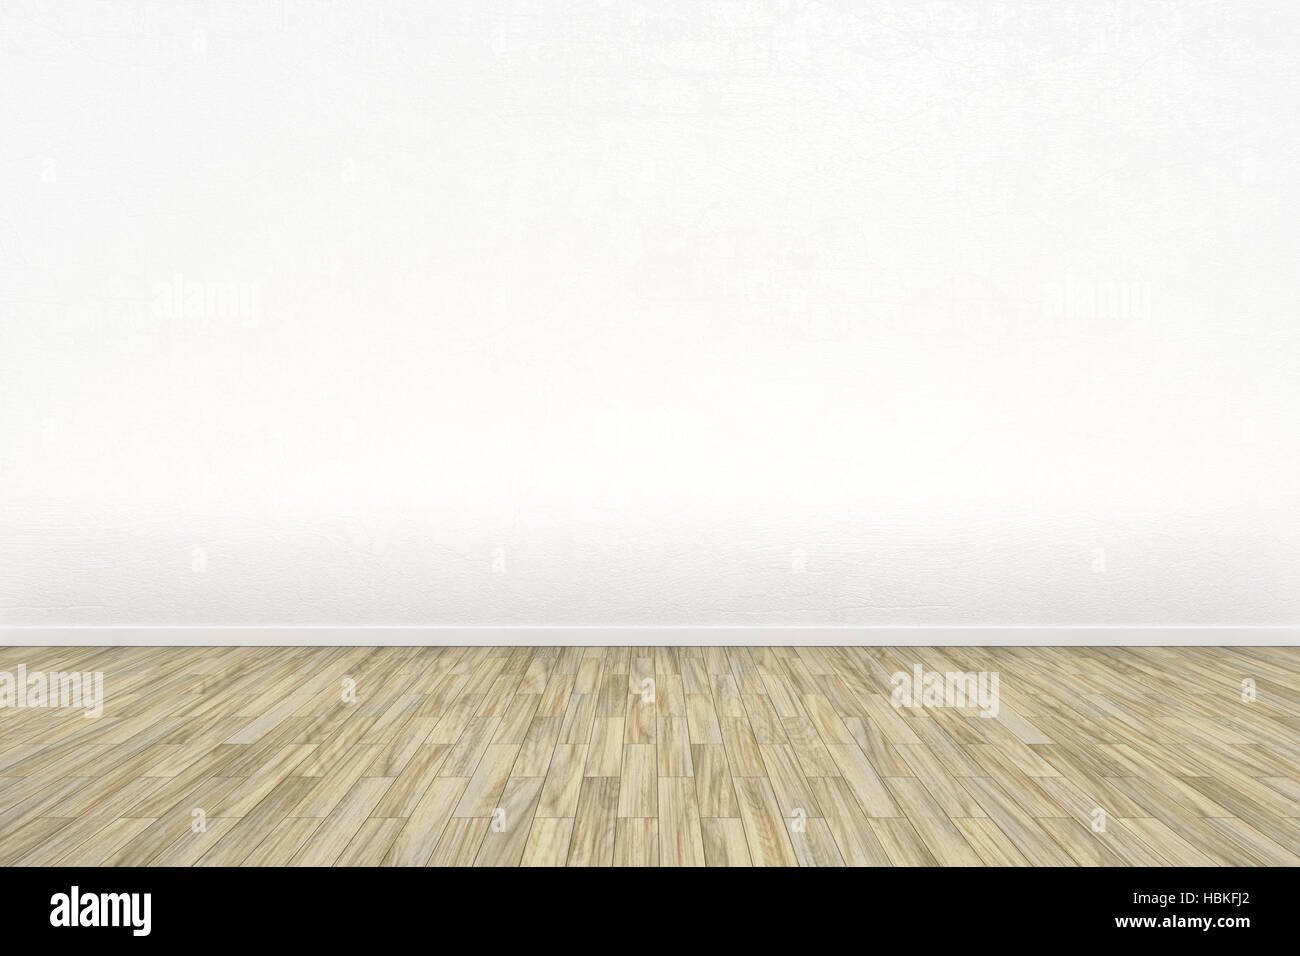 empty room with a wooden floor Stock Photo